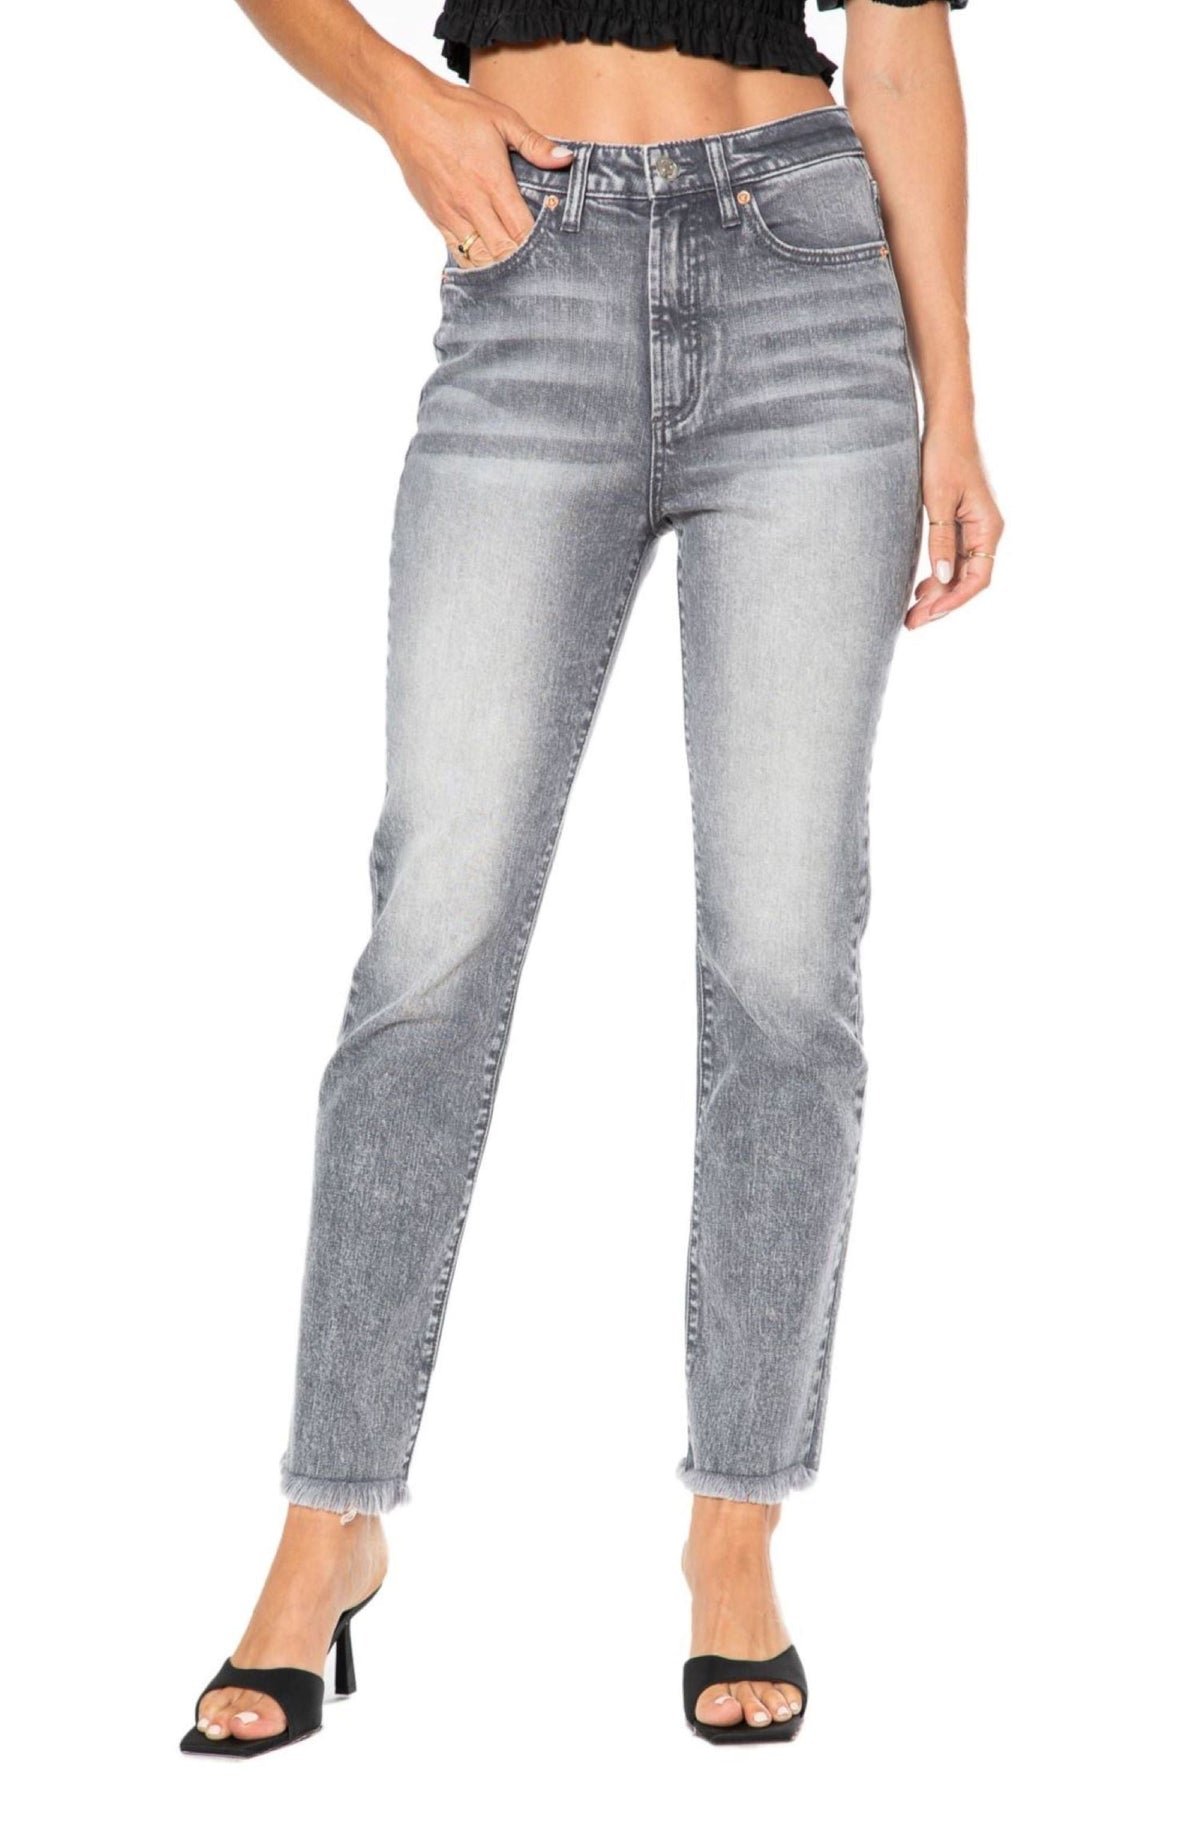 Juicy Couture Venice Straight Leg Jeans Grey Marble